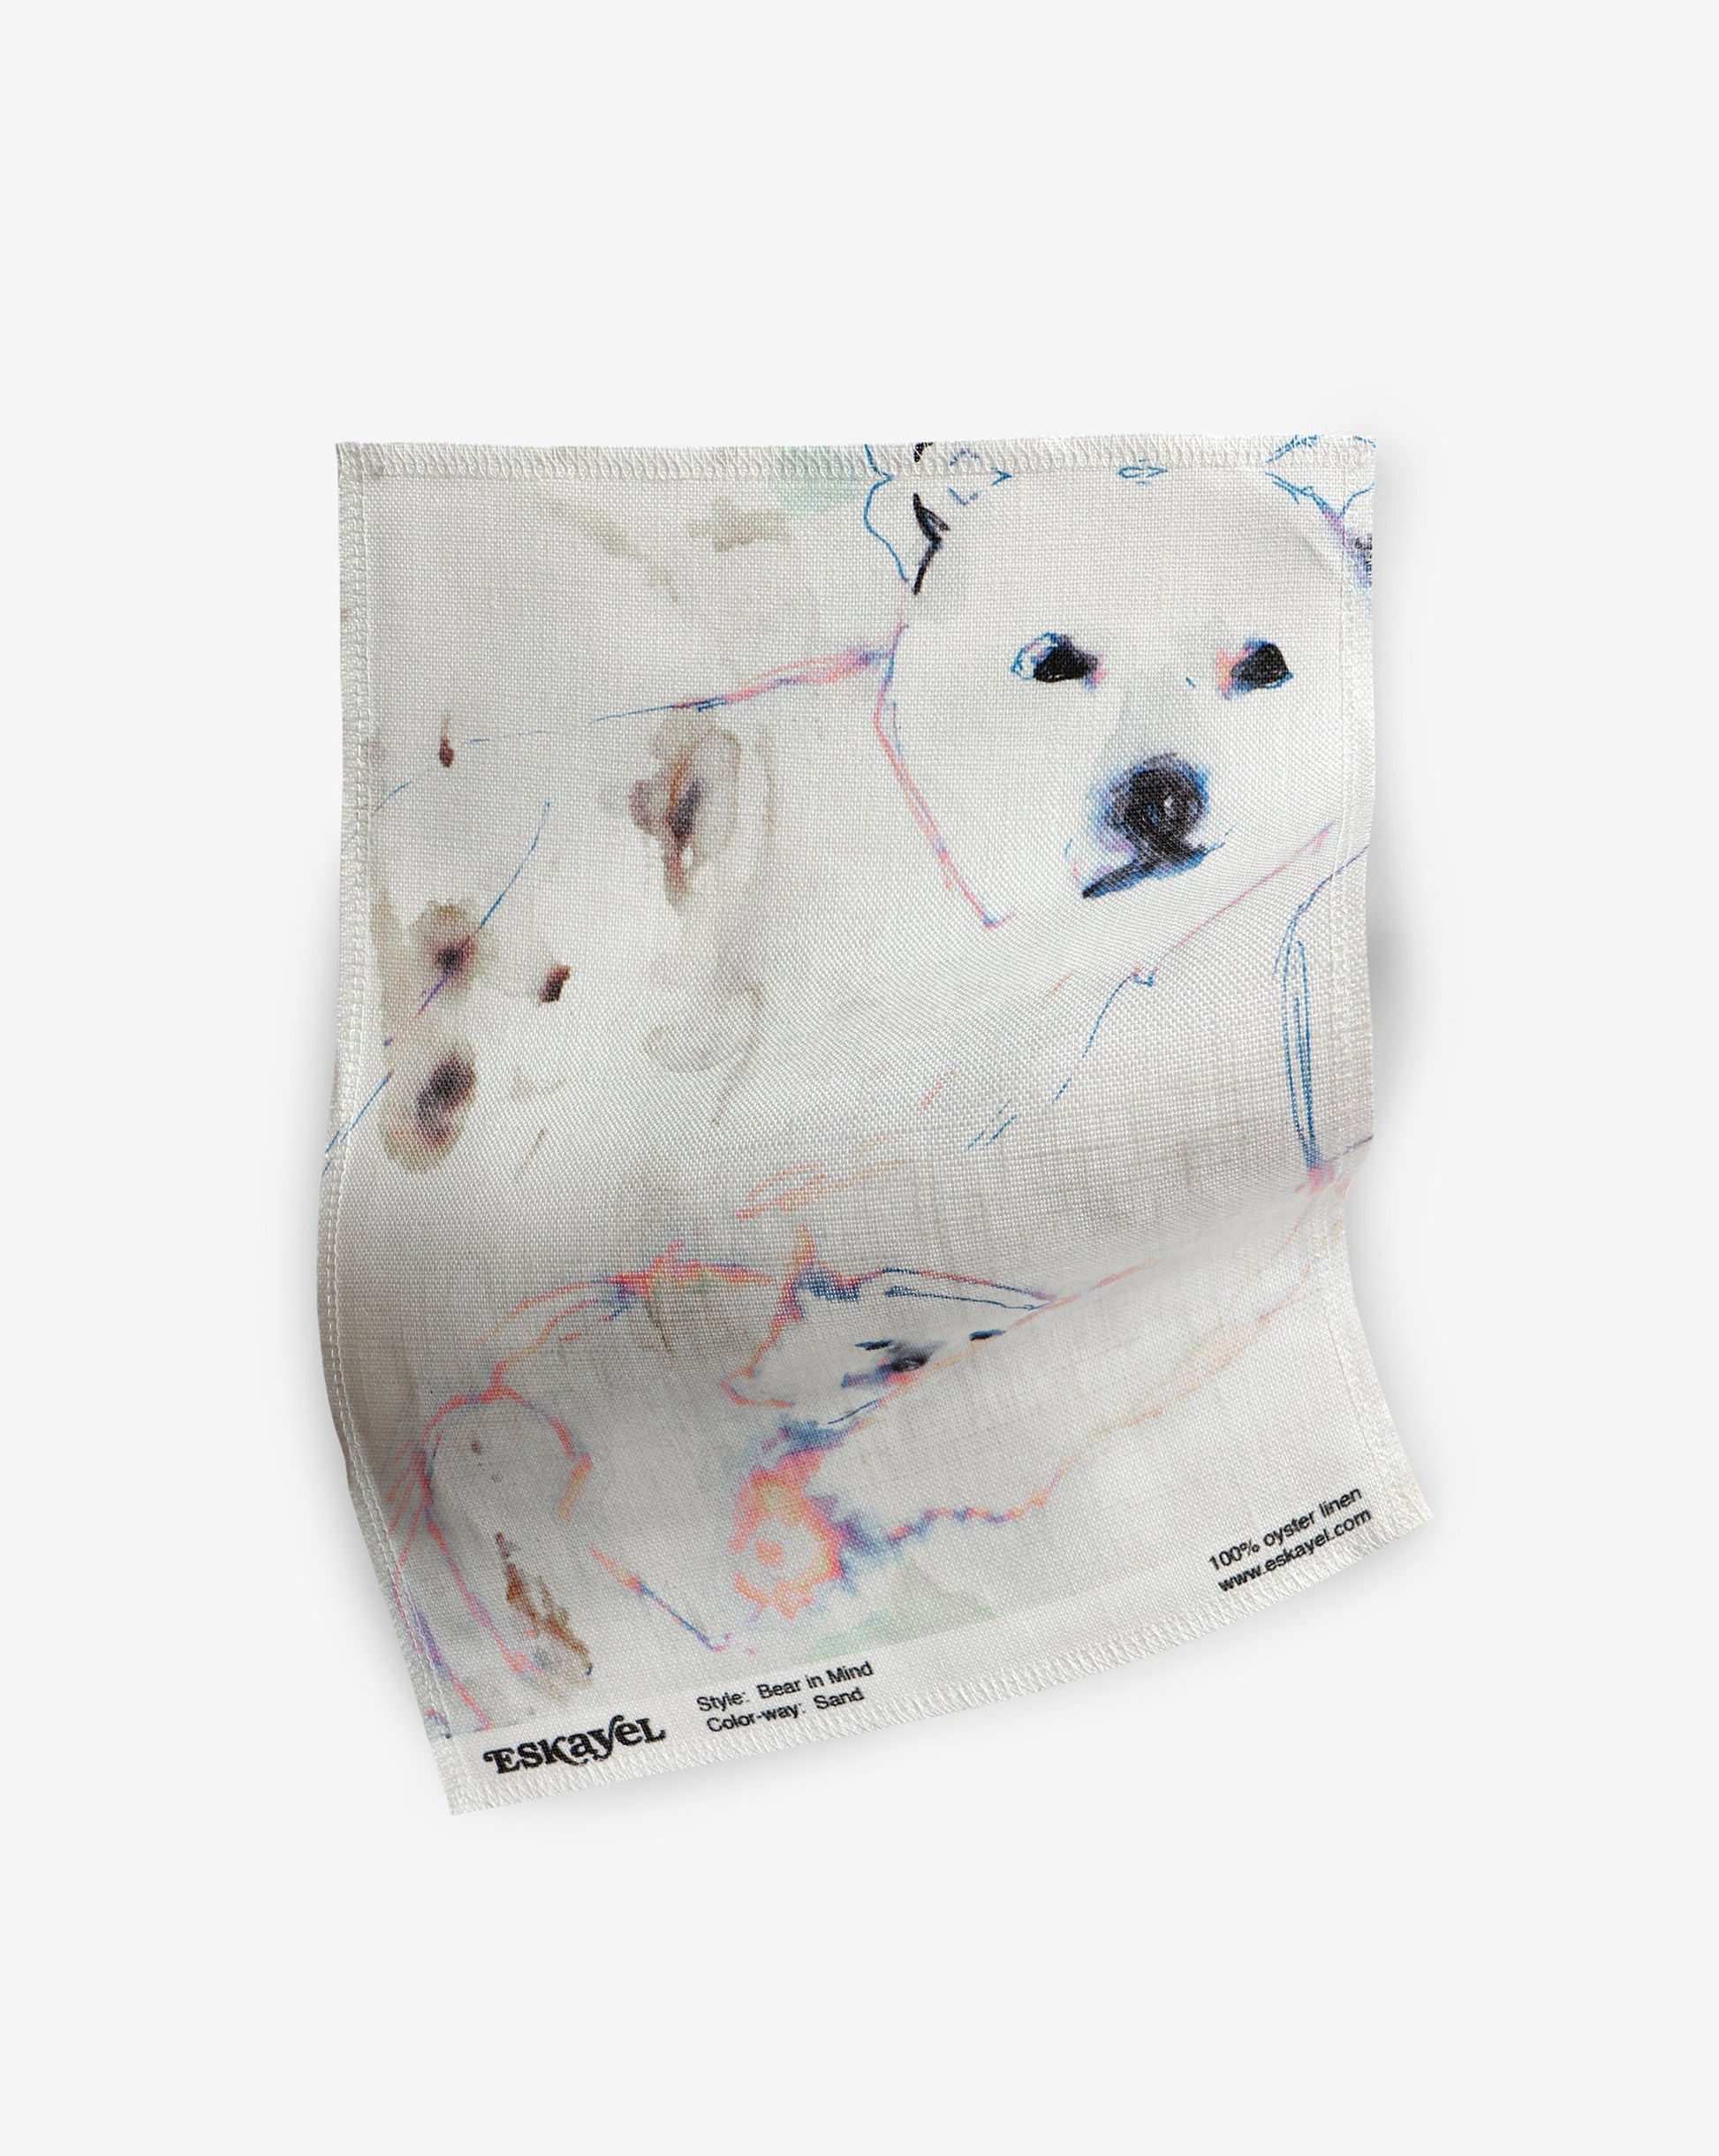 A white fabric with "Bear in Mind Fabric Sand" on it